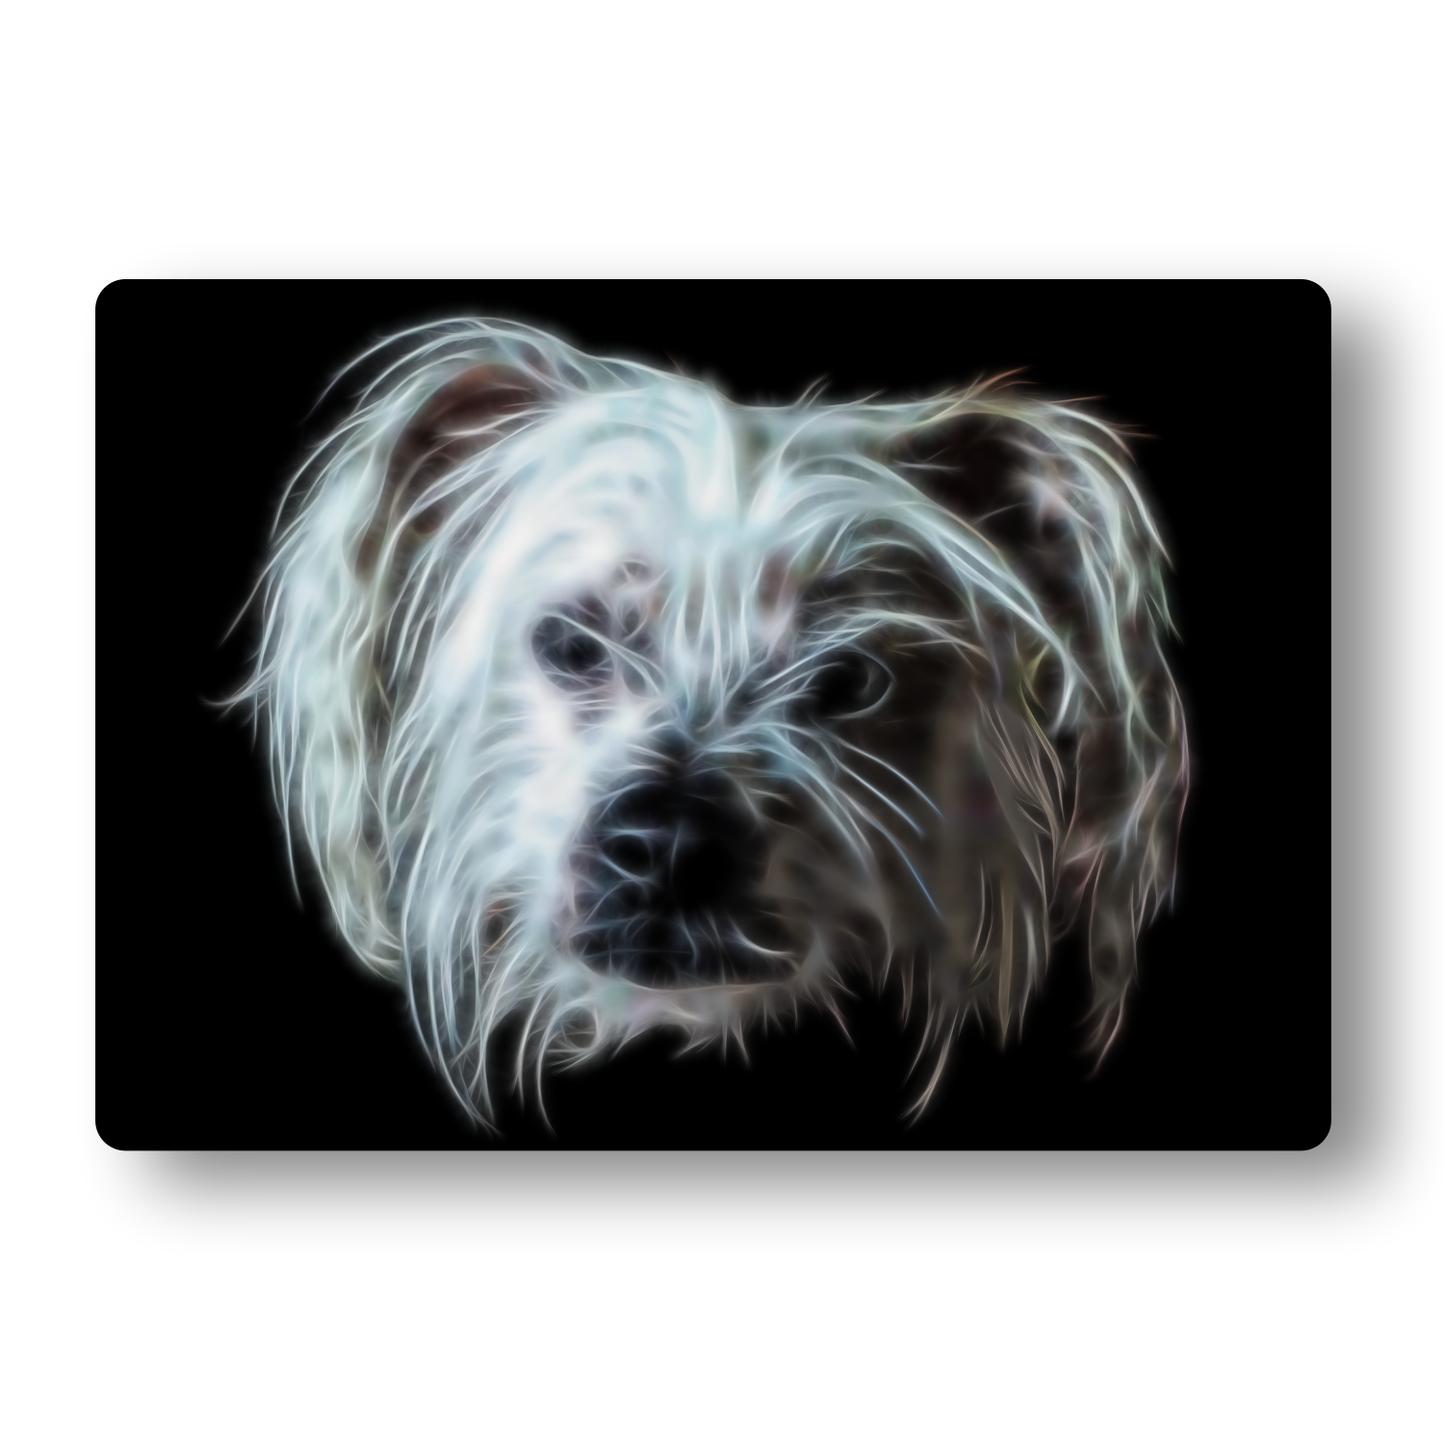 Chinese Crested Dog Metal Wall Plaque